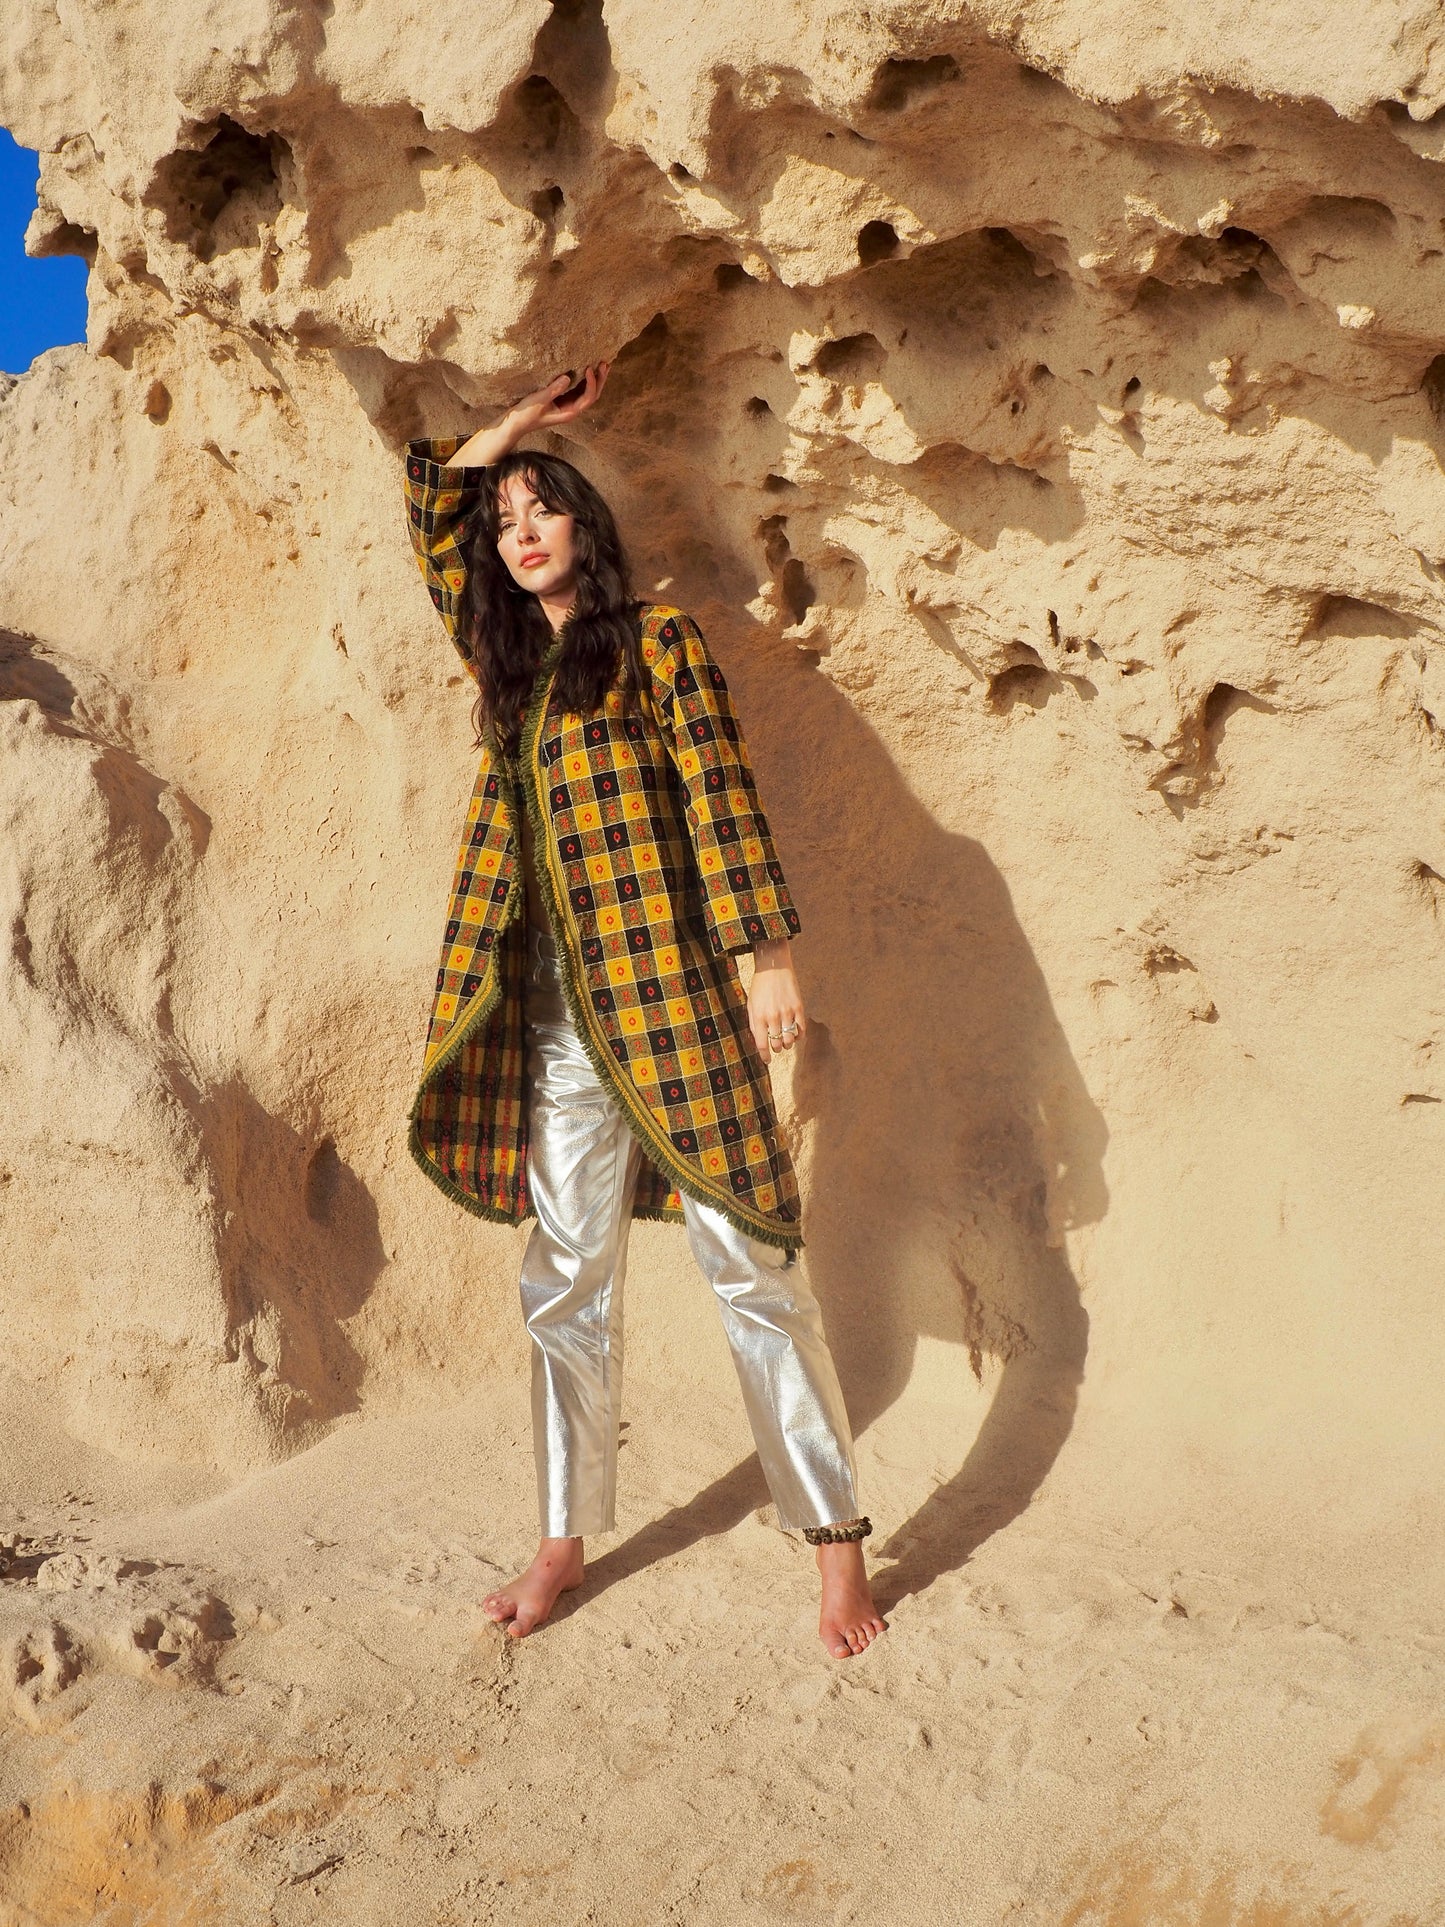 Long Full Jacket in Mustard Yellow, Black, and Red - Upcycled Vintage Textiles Made by Vagabond Ibiza